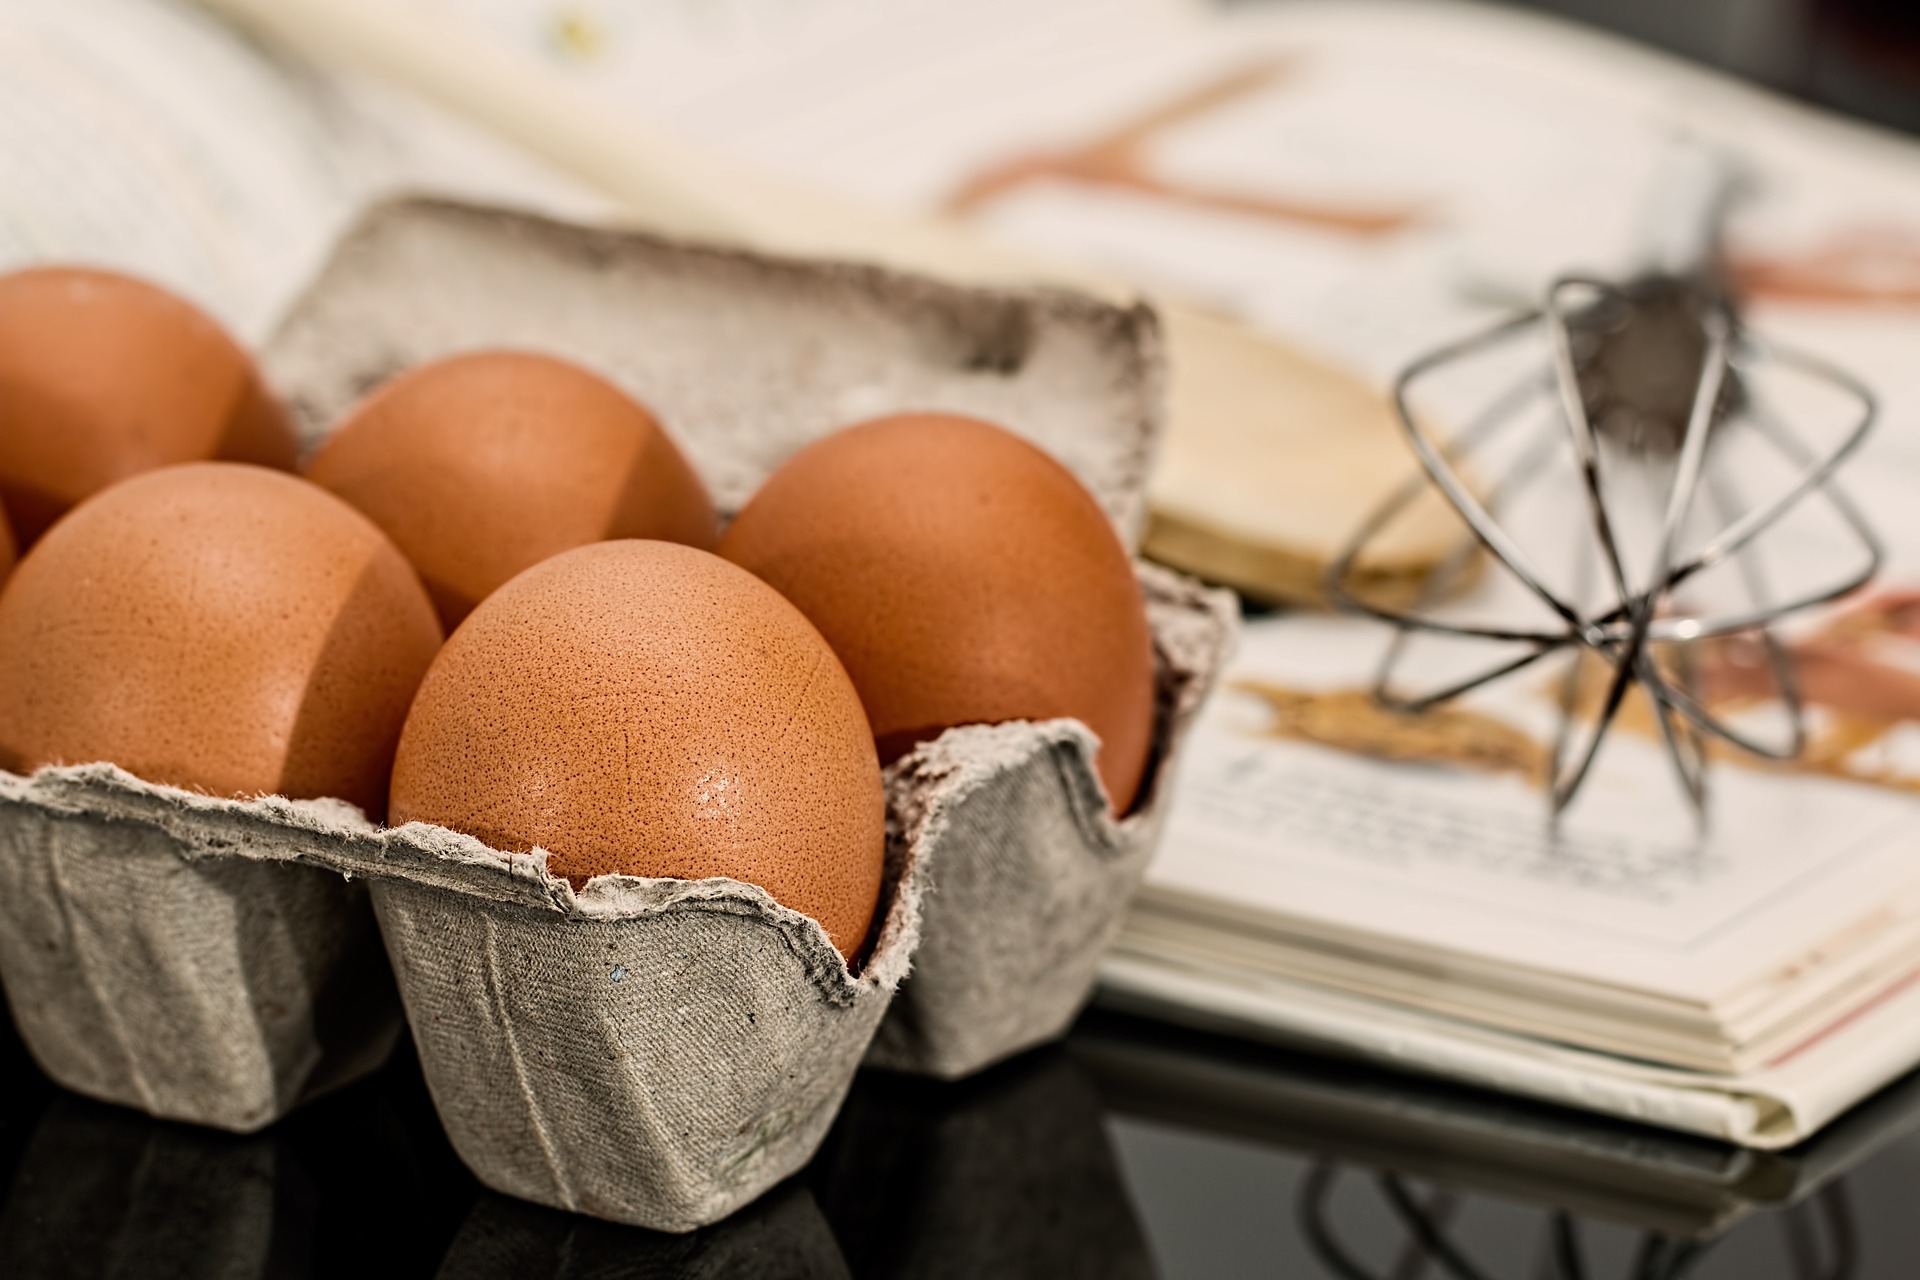 Too many eggs may increase your risk of death